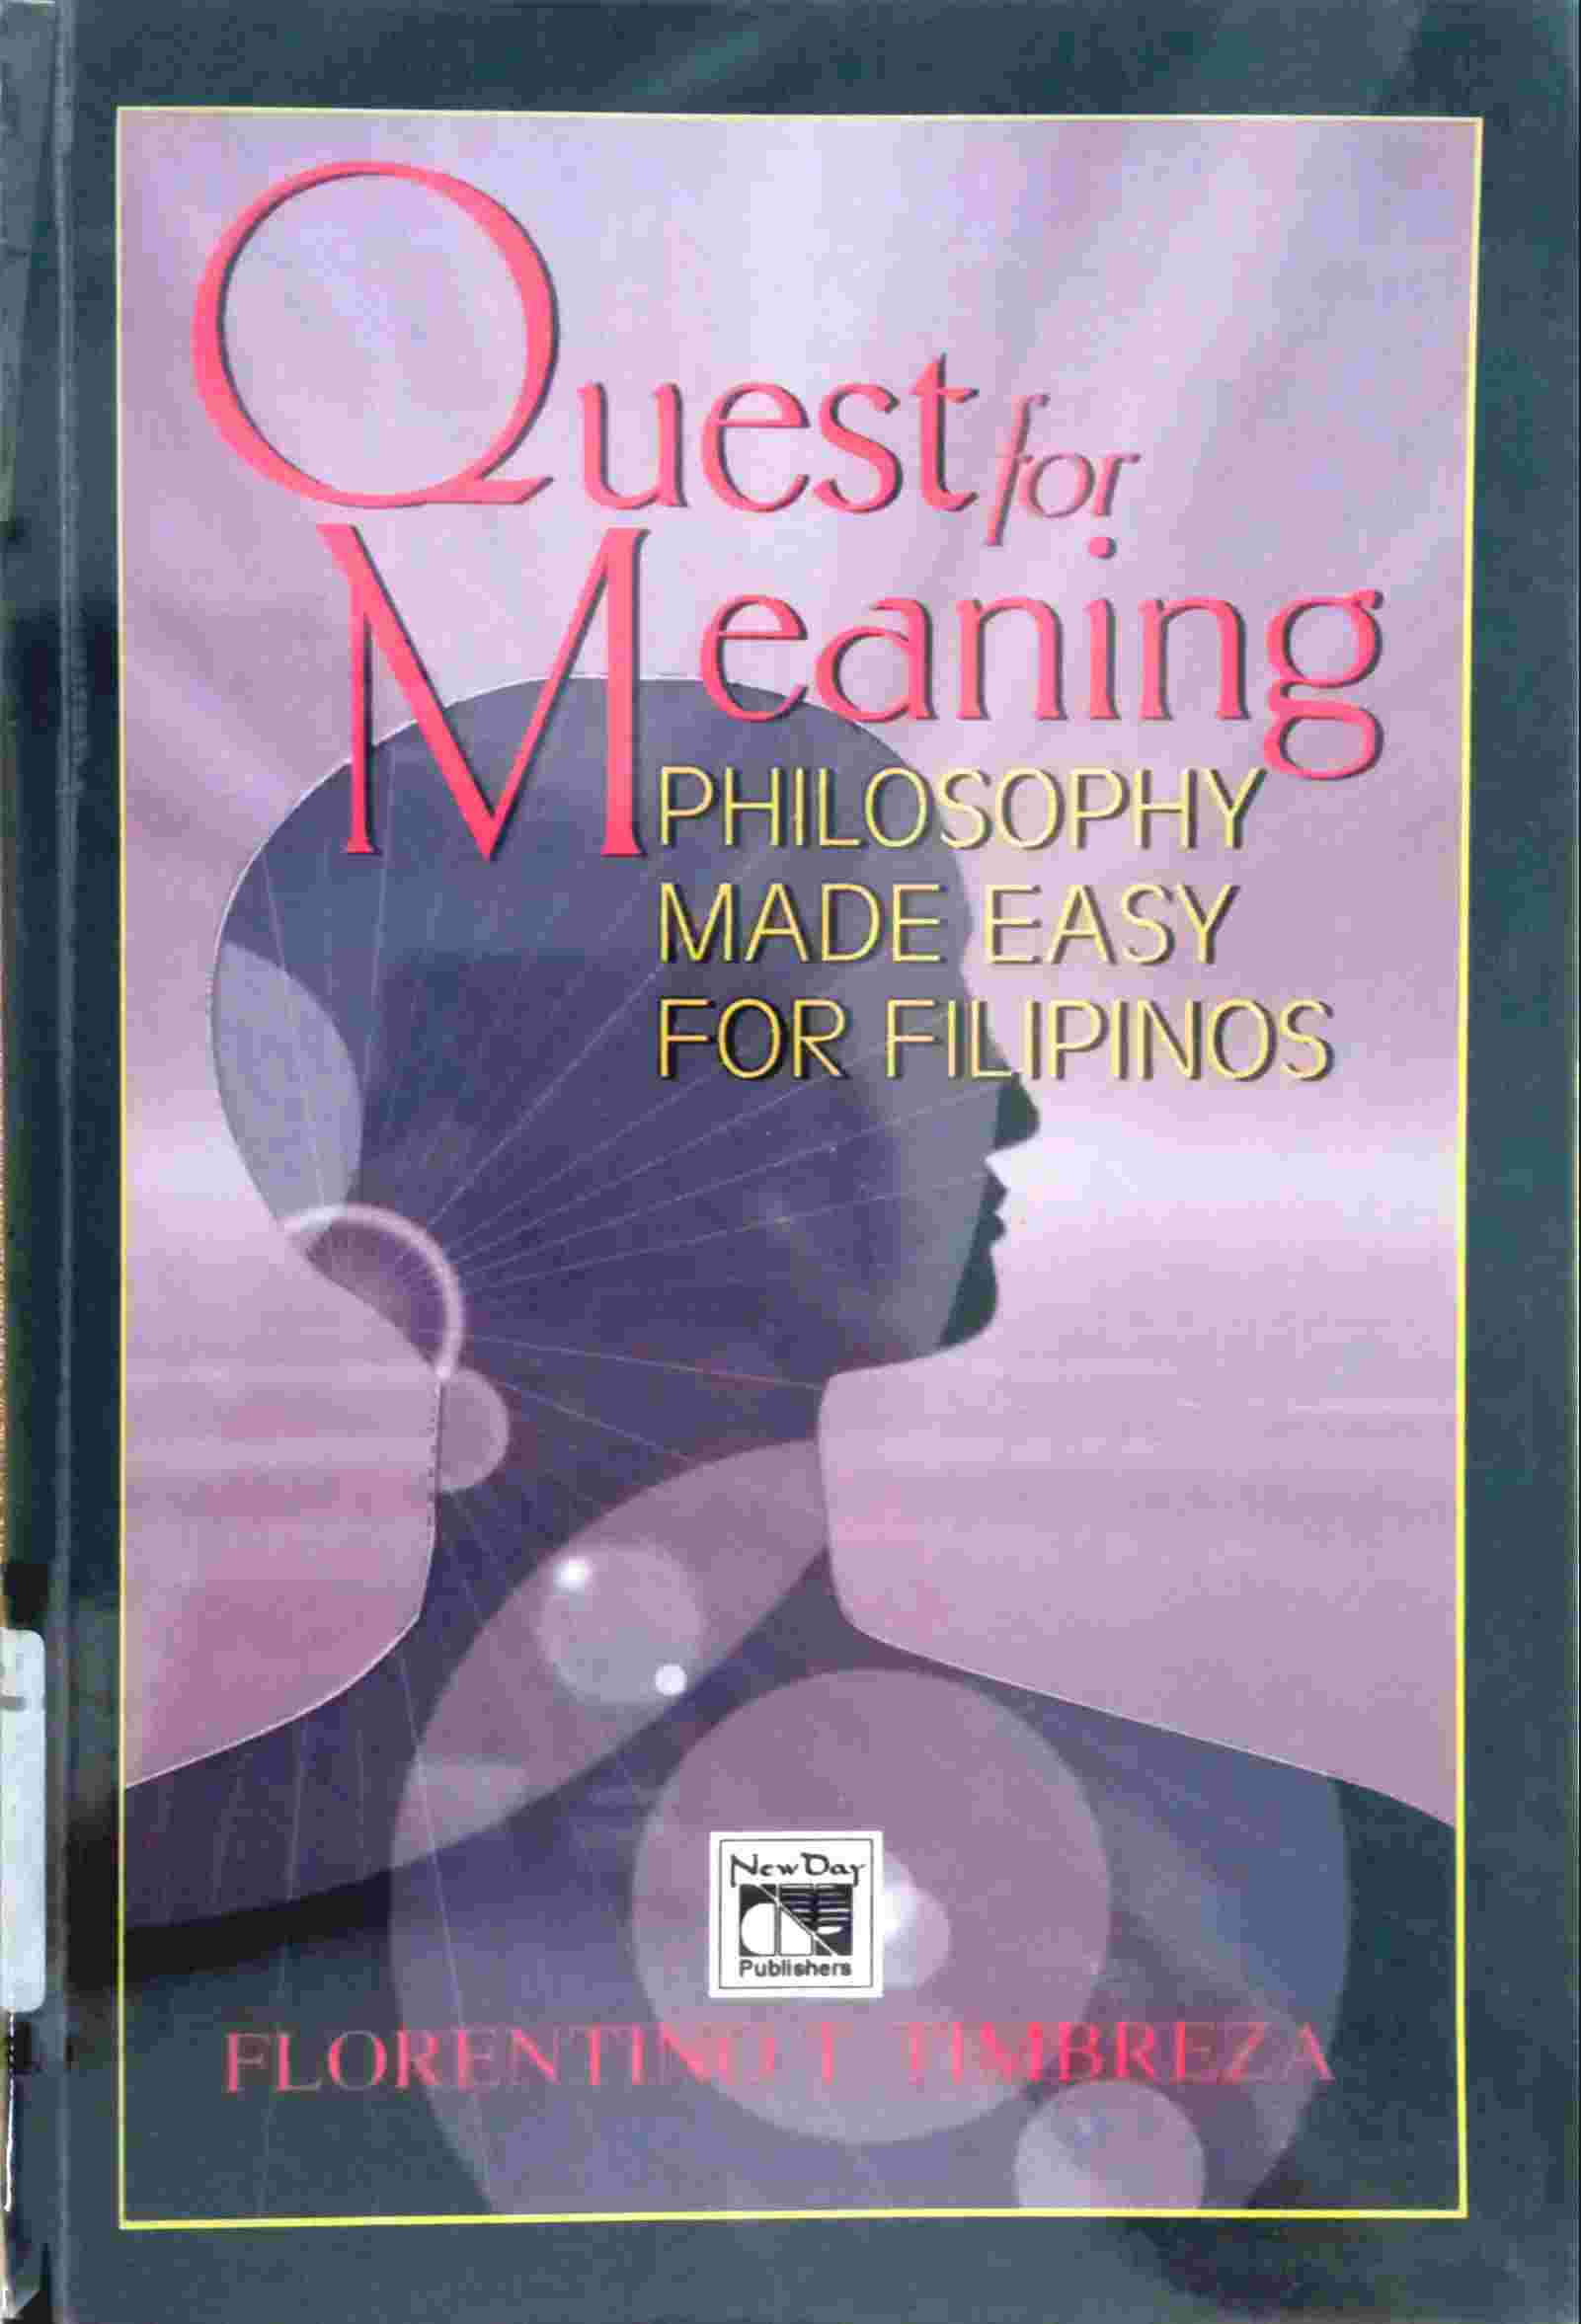 QUEST FOR MEANING - PHILOSOPHY MADE EASY FOR FILIPHINOS